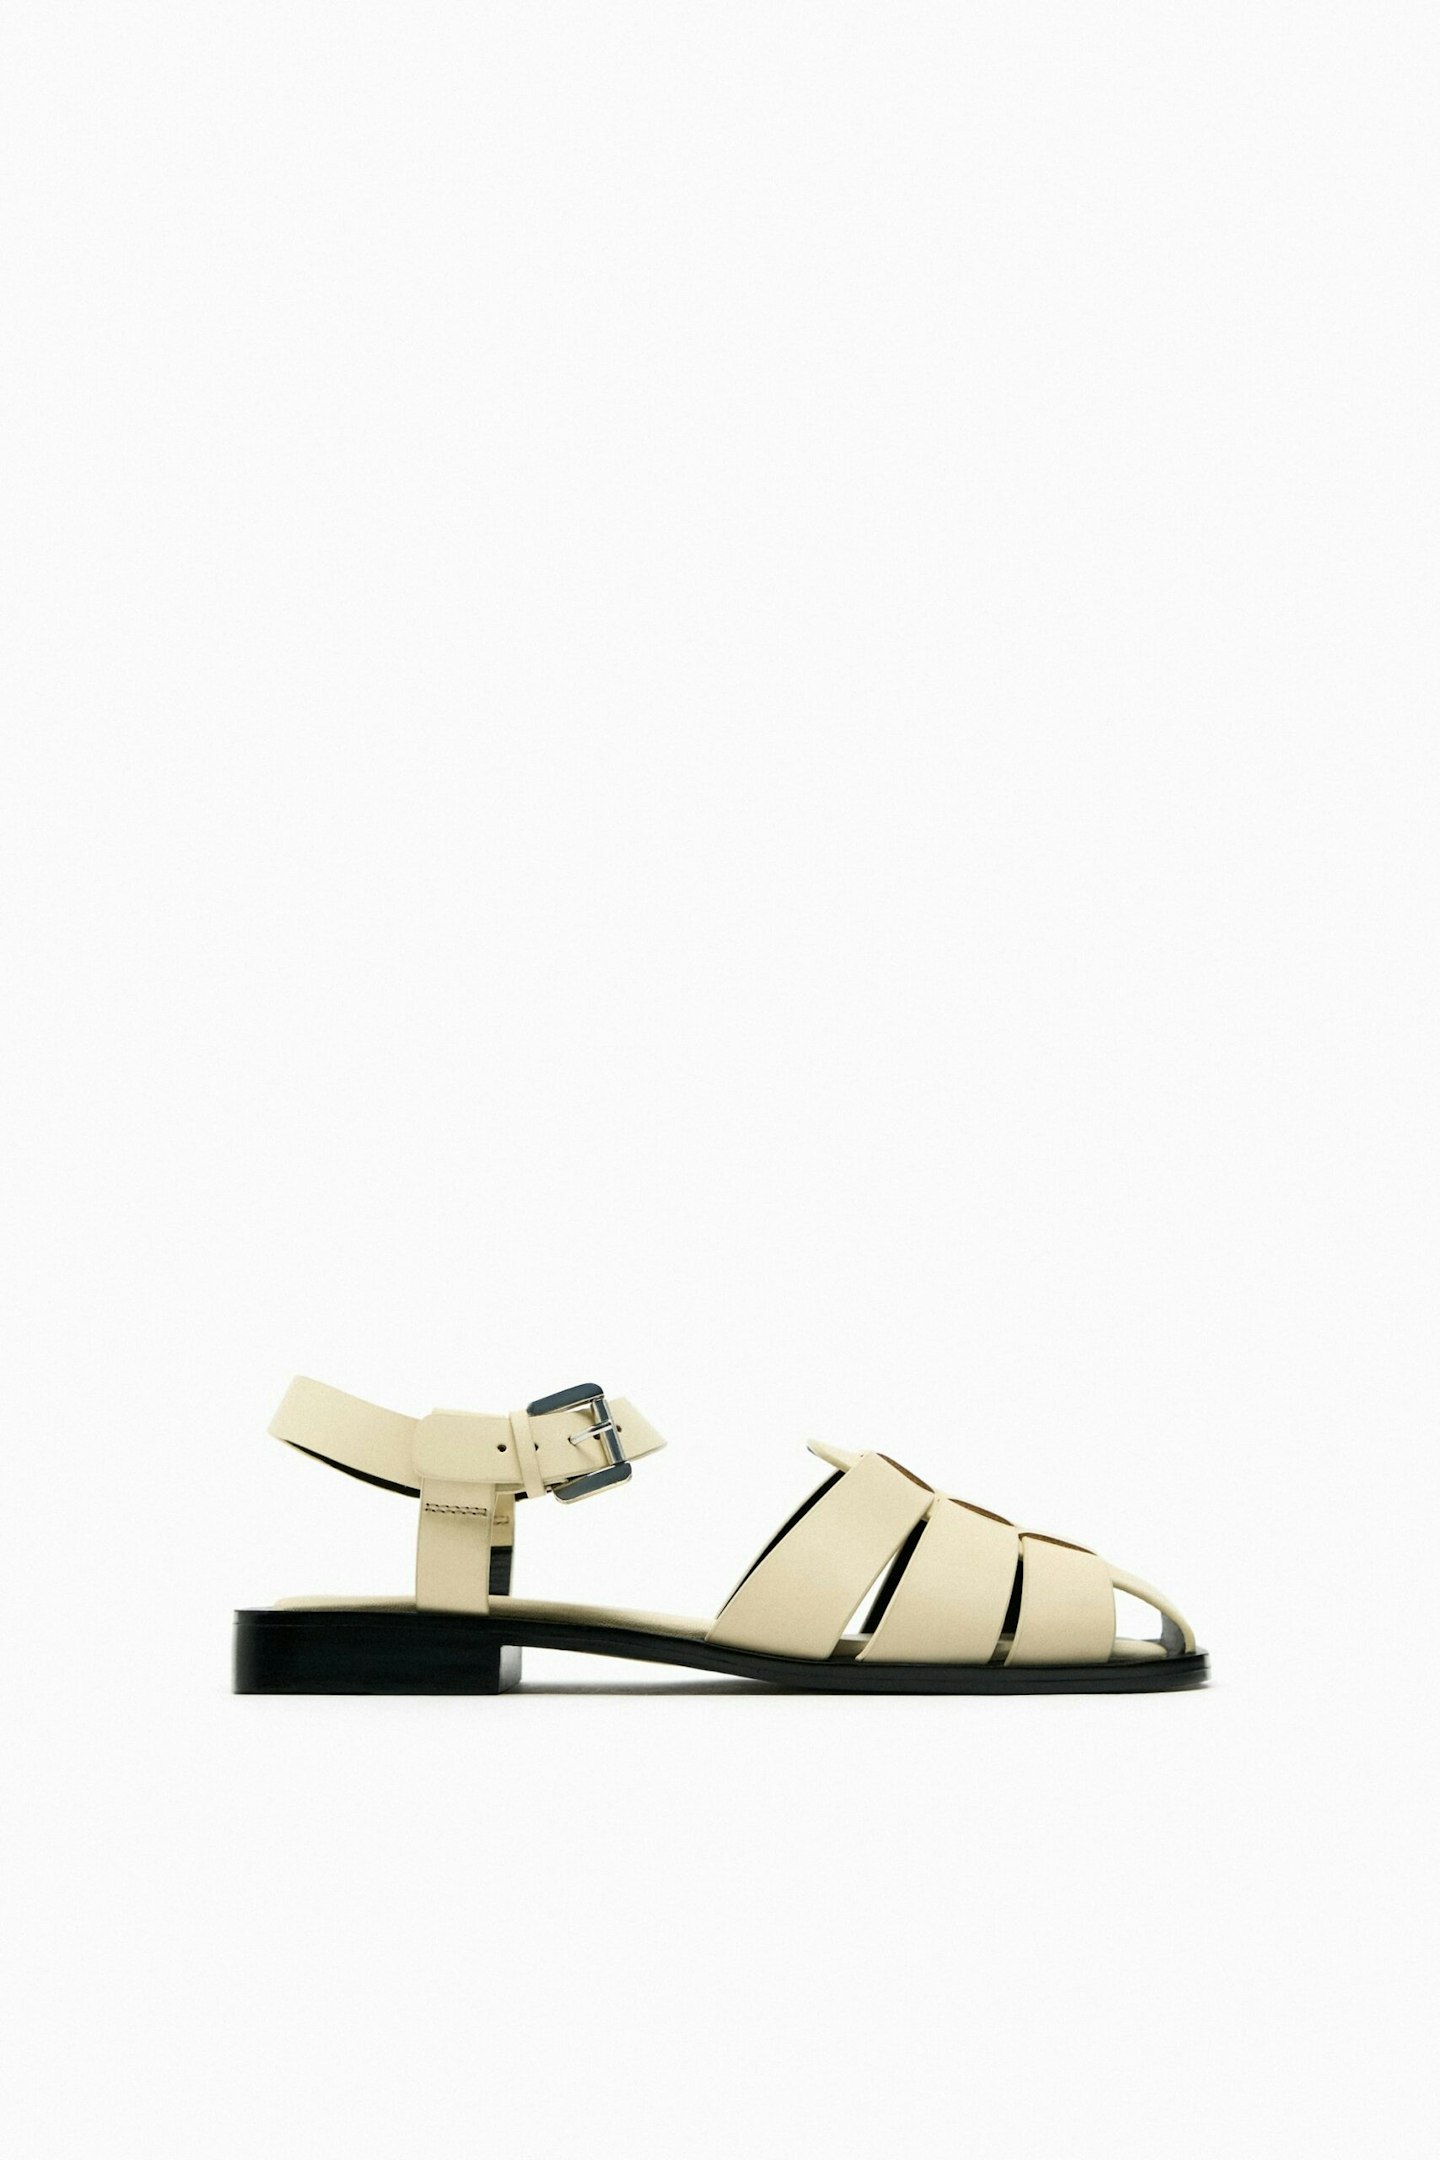 Zara, Flat Leather Cage Sandals